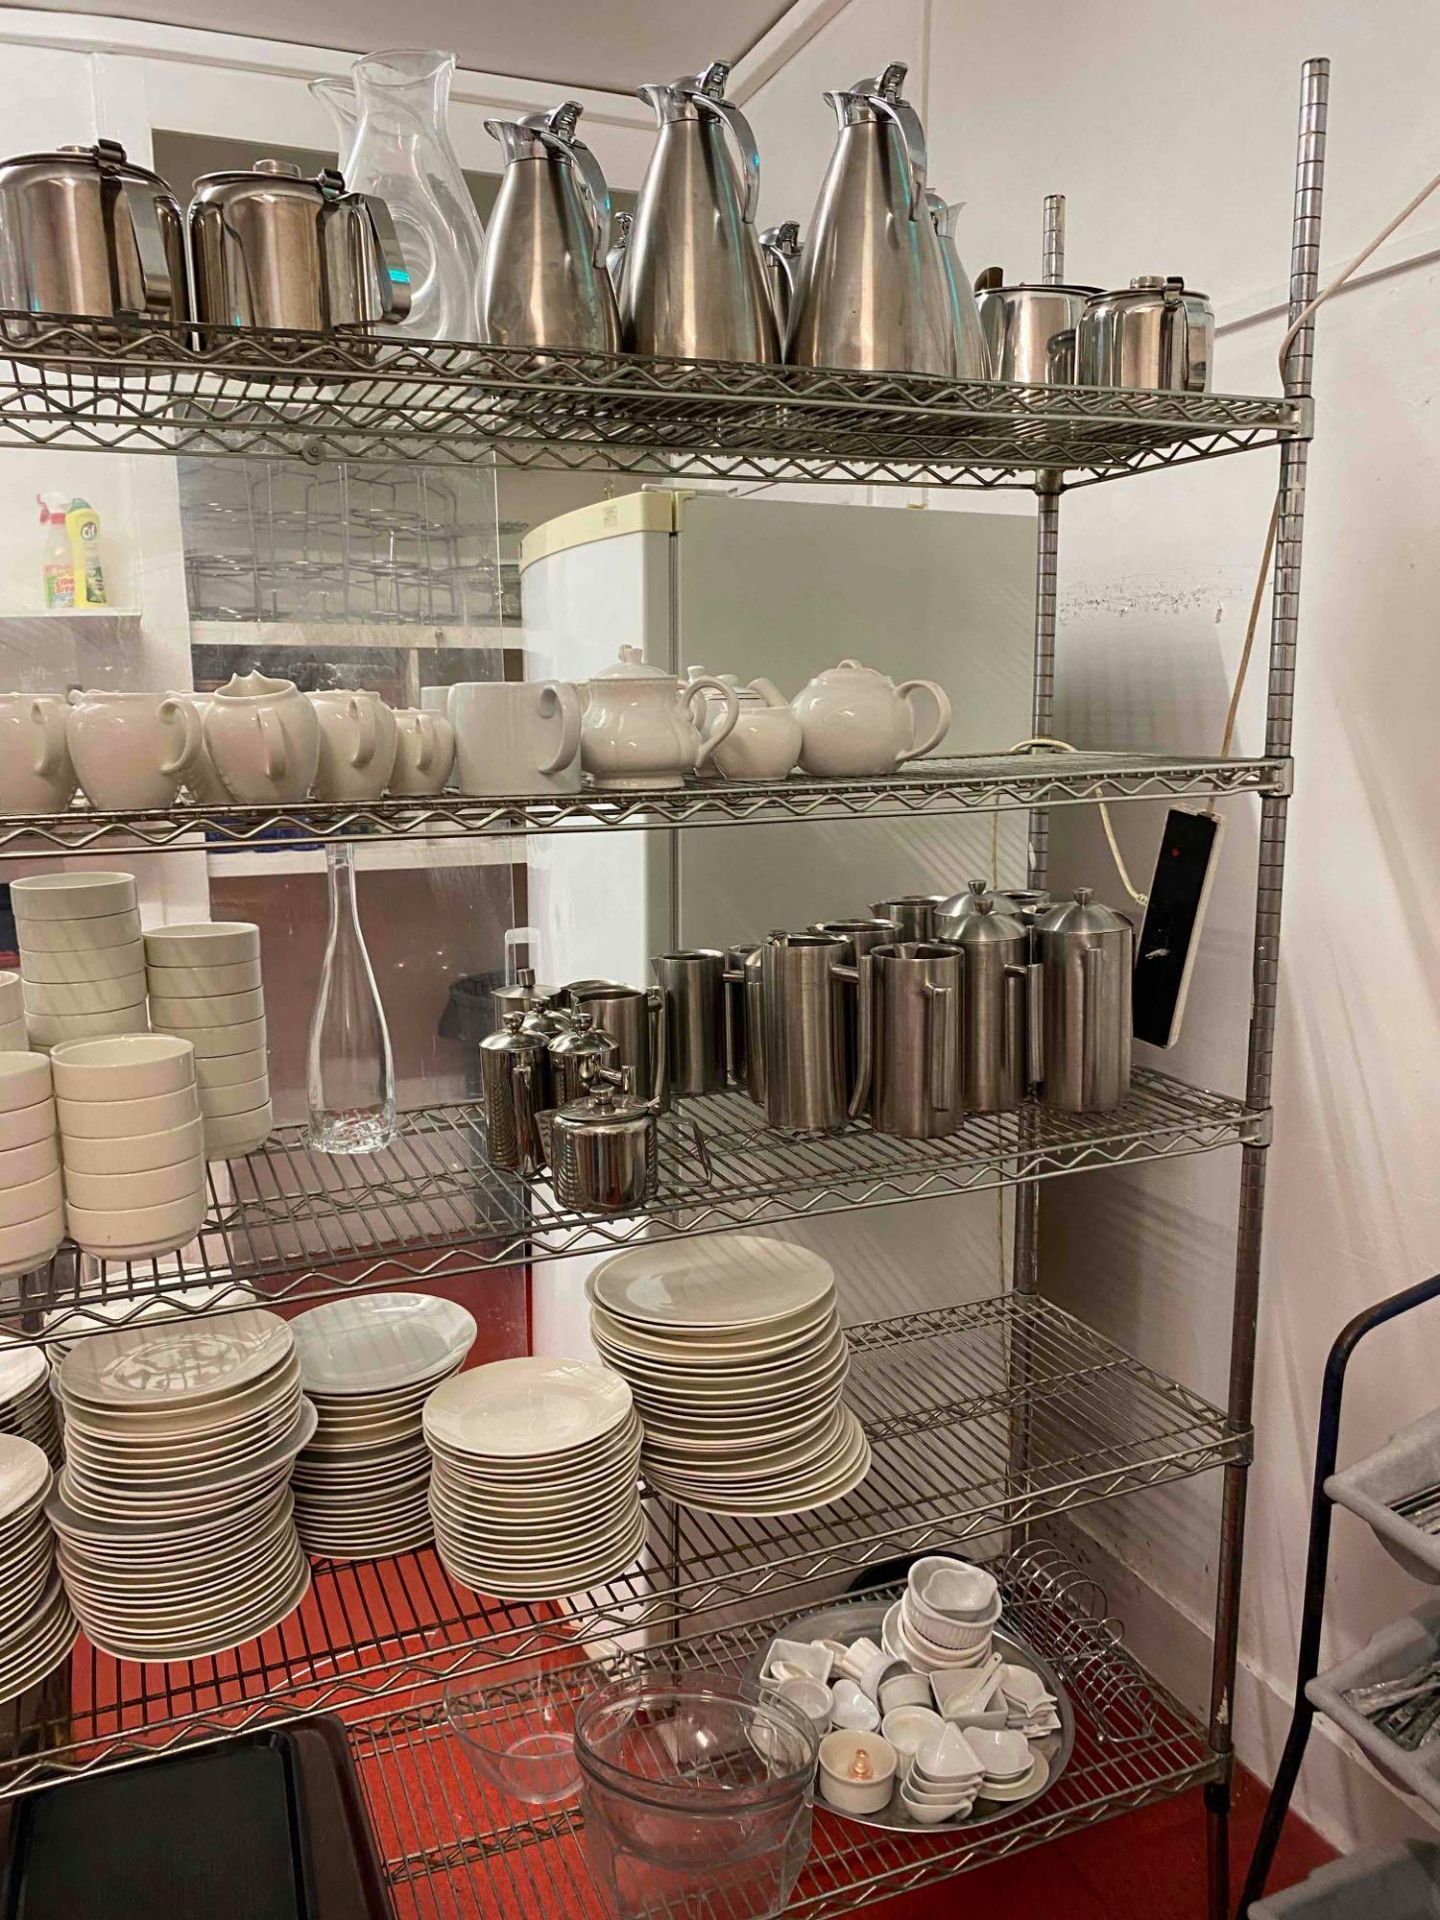 Content of fourth shelf of metal kitchen racking. As found to include tea pots and milk jugs. - Image 2 of 2